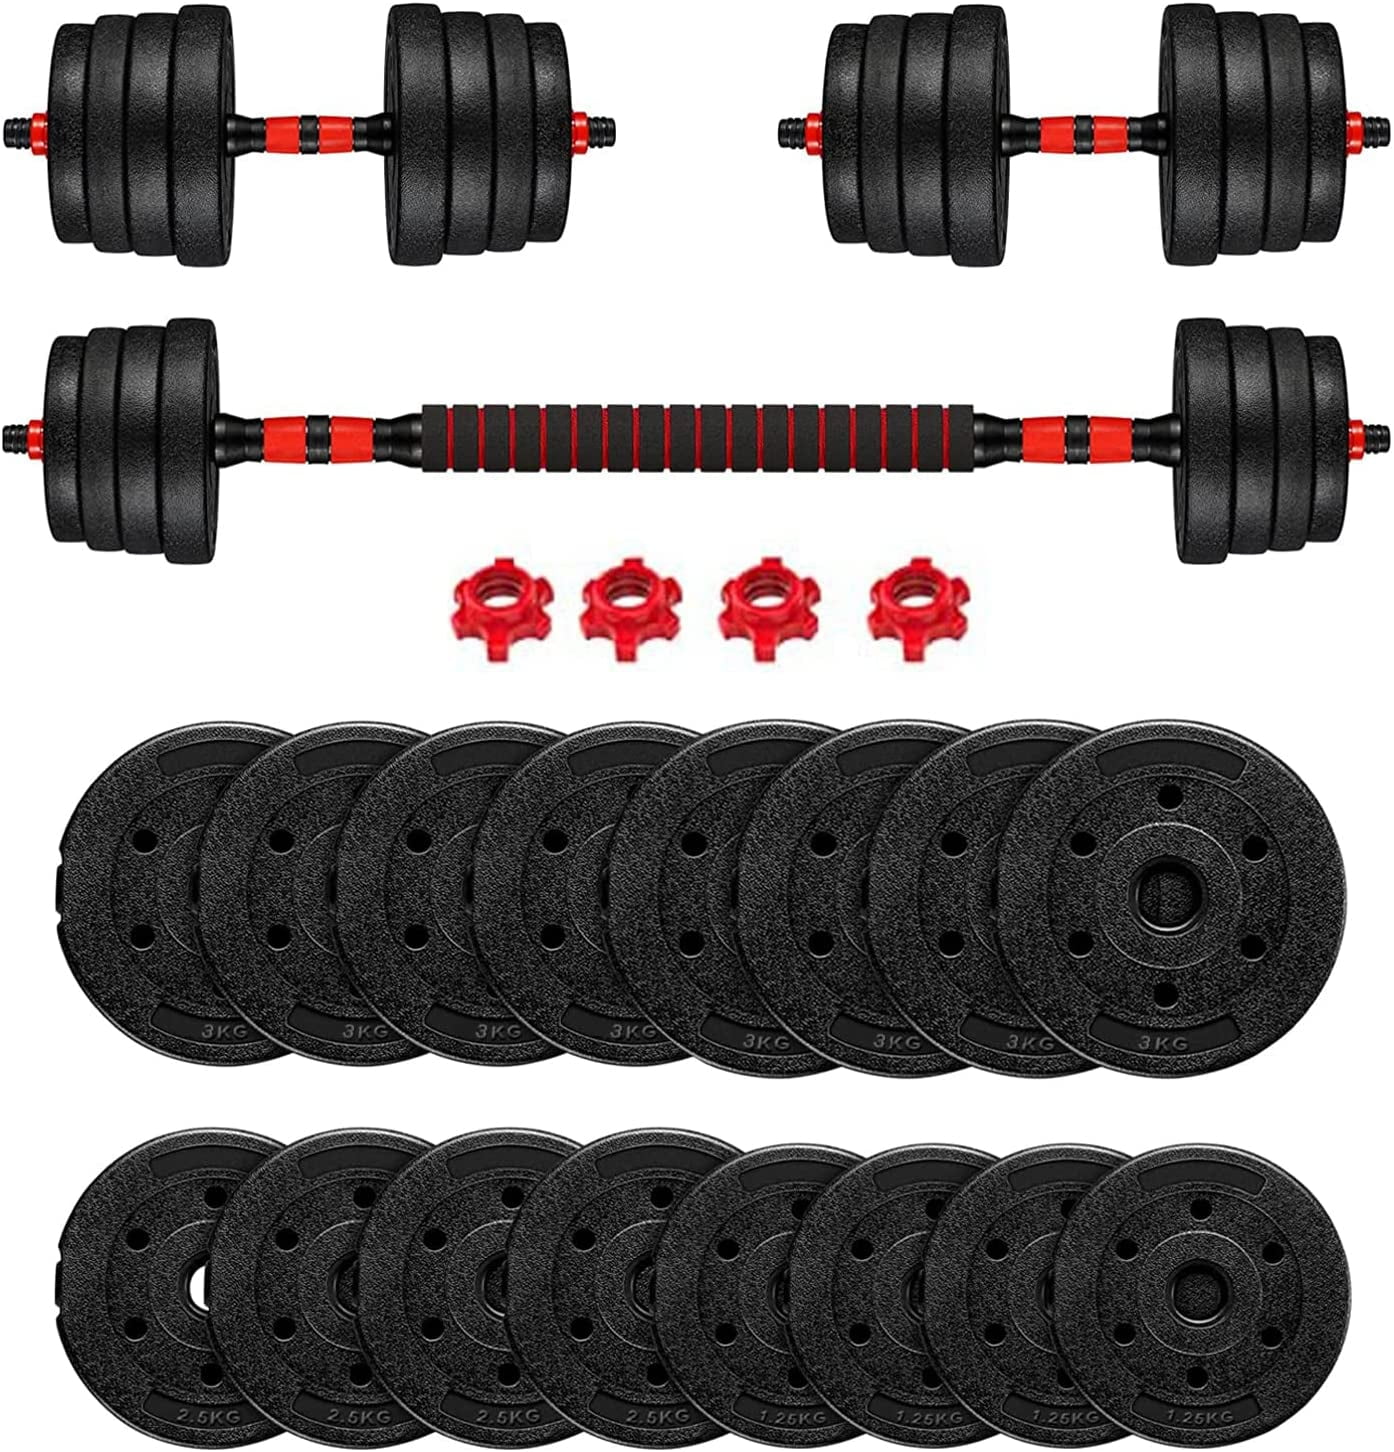 22-88LB Adjustable Weights Dumbbells Set Free Weights Set With Connecting Rod 